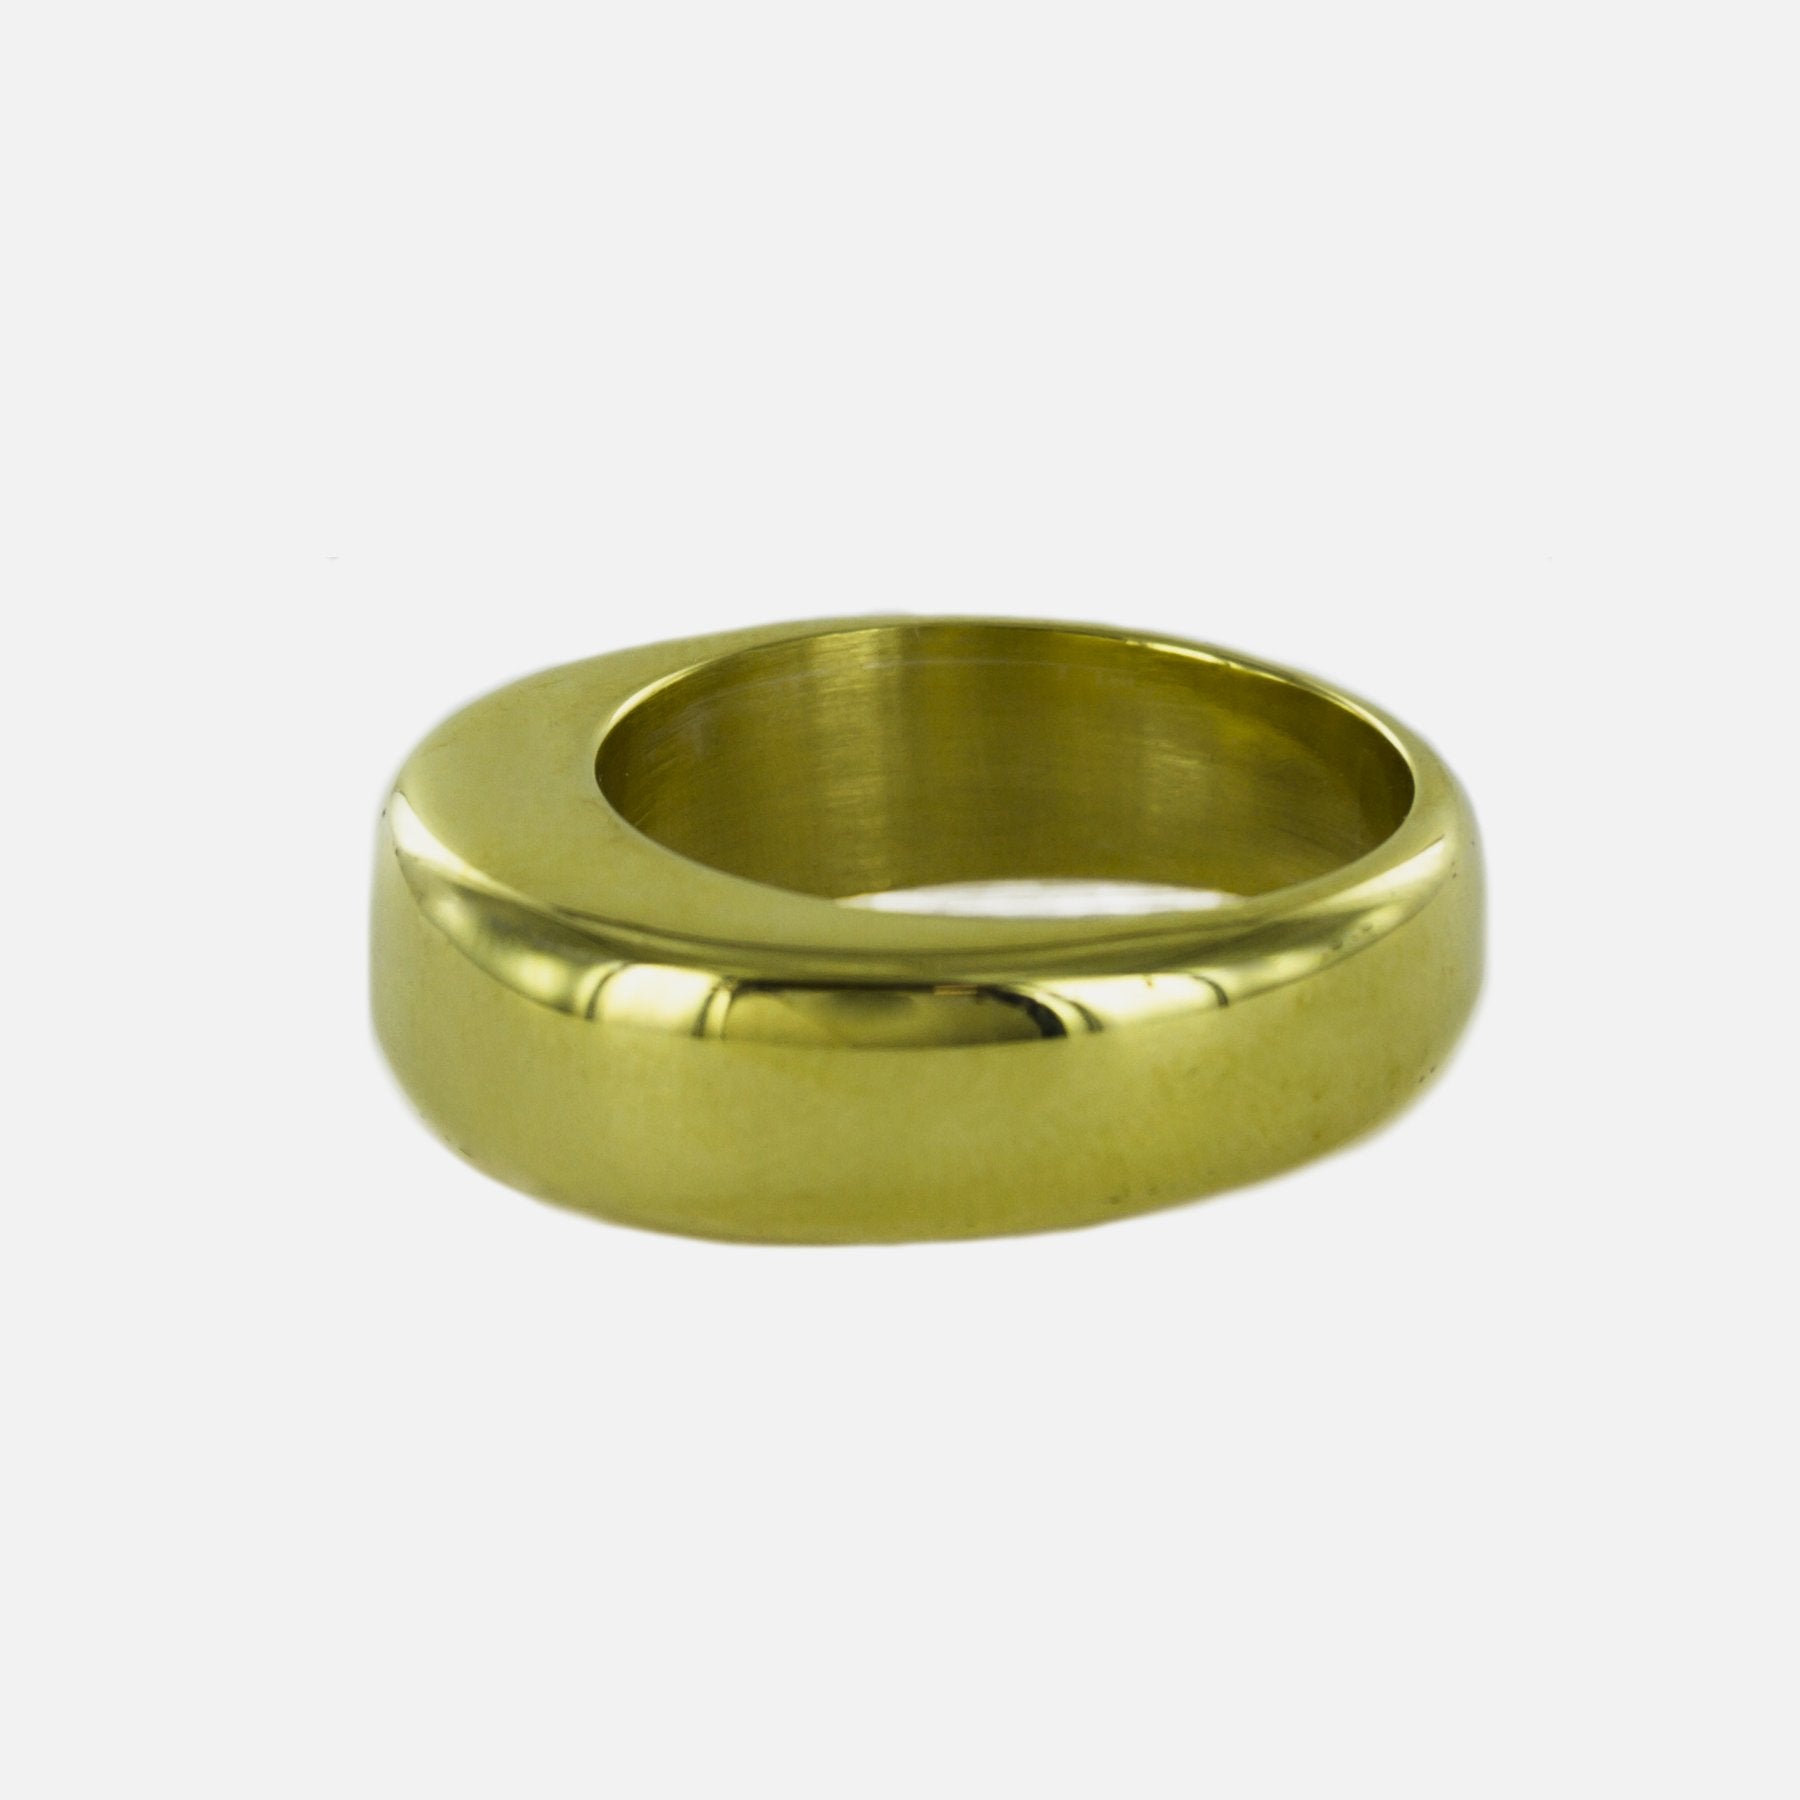 Hollow Brass Ring - Size 7